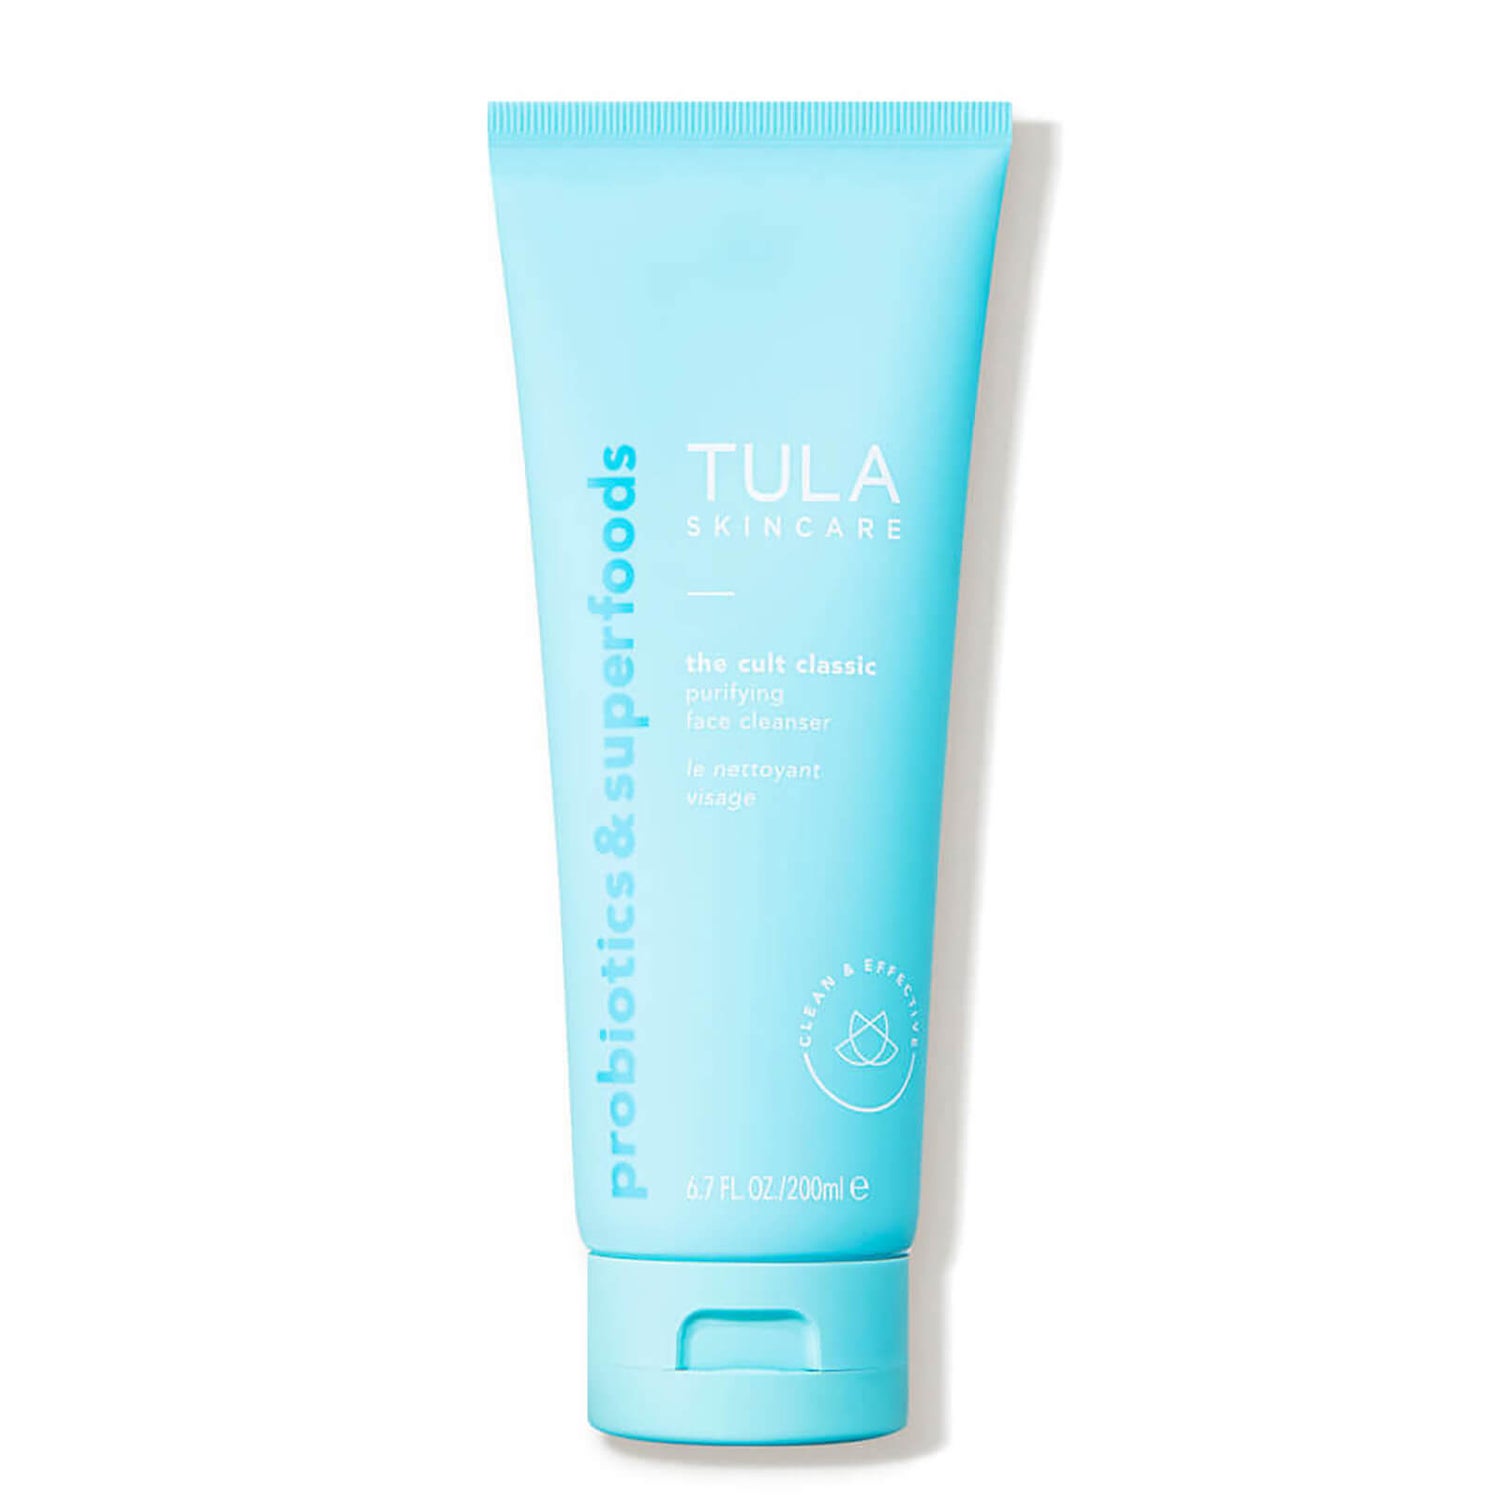 TULA Skincare The Cult Classic Purifying Face Cleanser (6.7 fl. oz.)